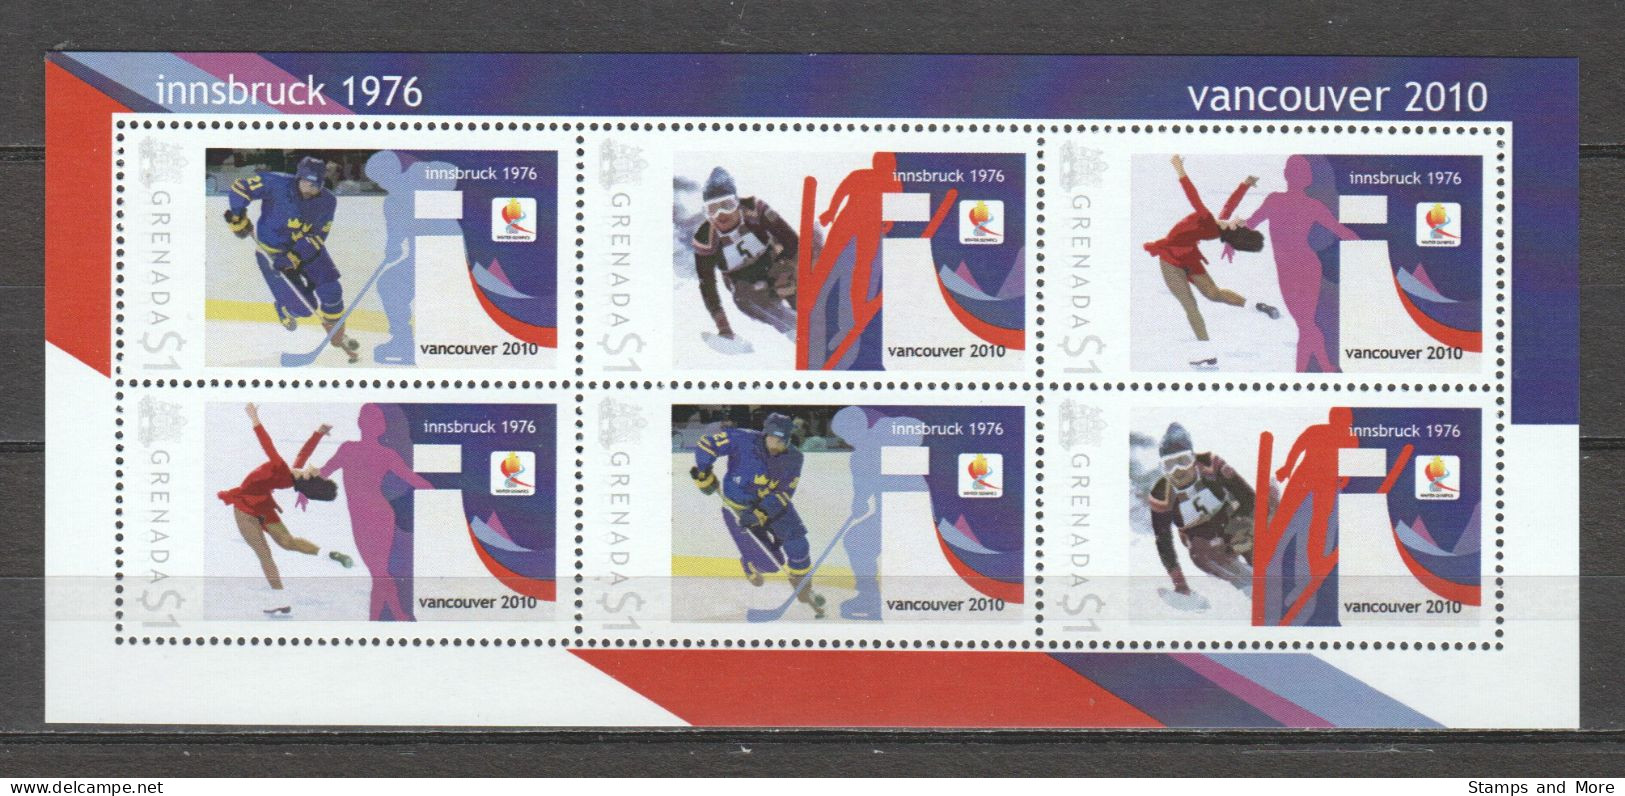 Grenada - Limited Edition Sheet 12 MNH - WINTER OLYMPICS VANCOUVER 2010 - INNSBRUCK 1976 - Winter 2010: Vancouver